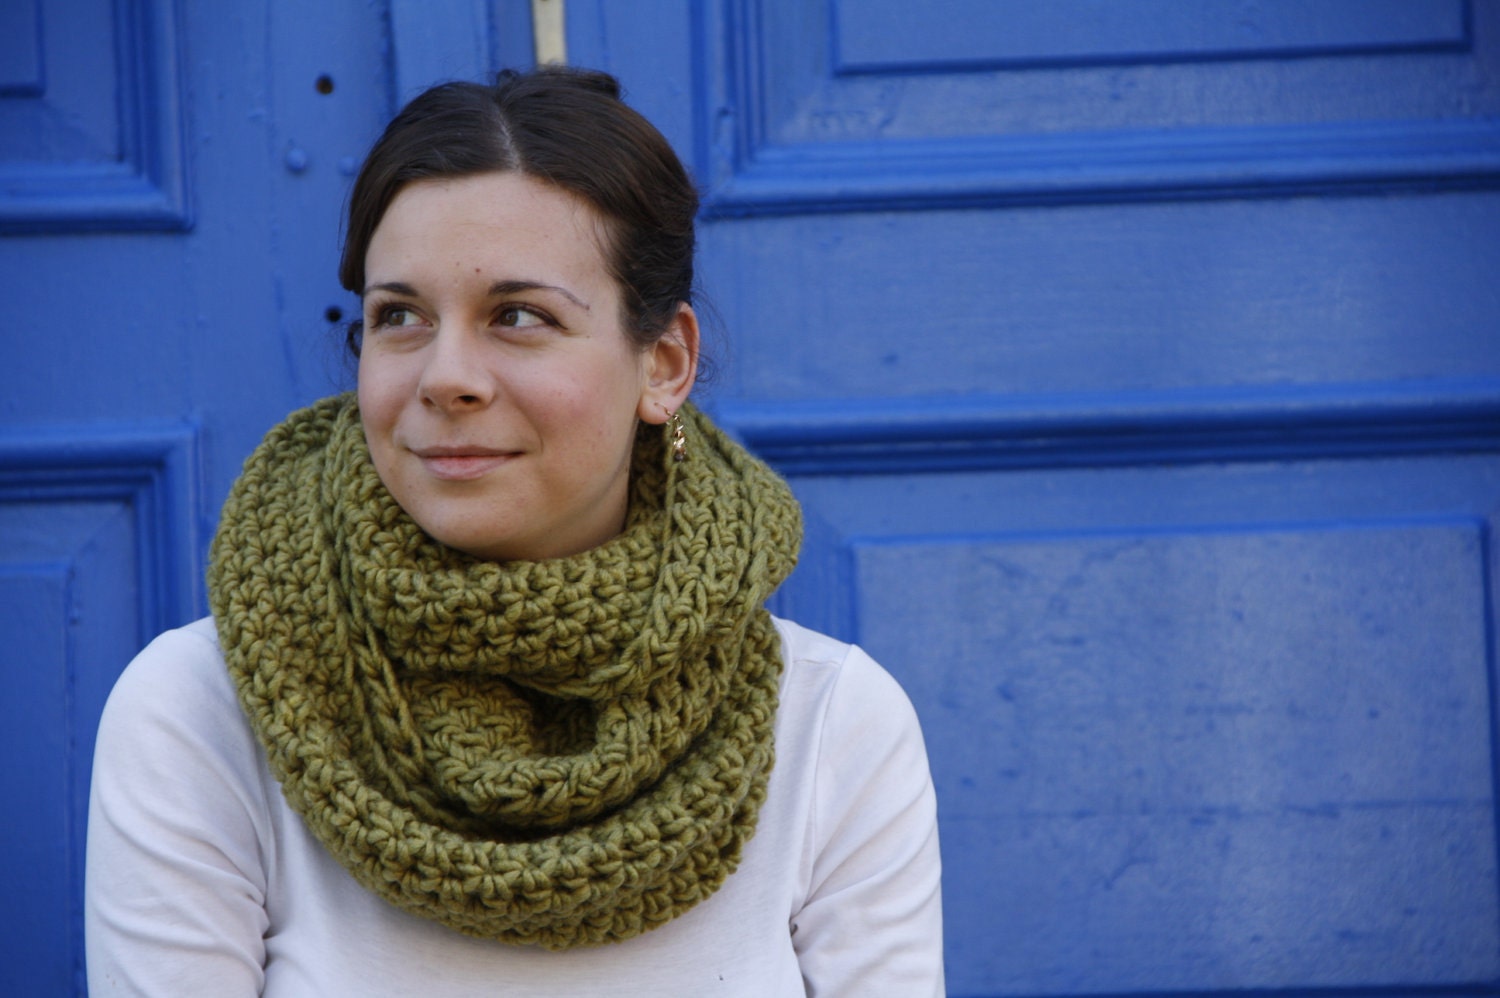 Hand Crocheted Snood Scarf by lsenerch on Etsy